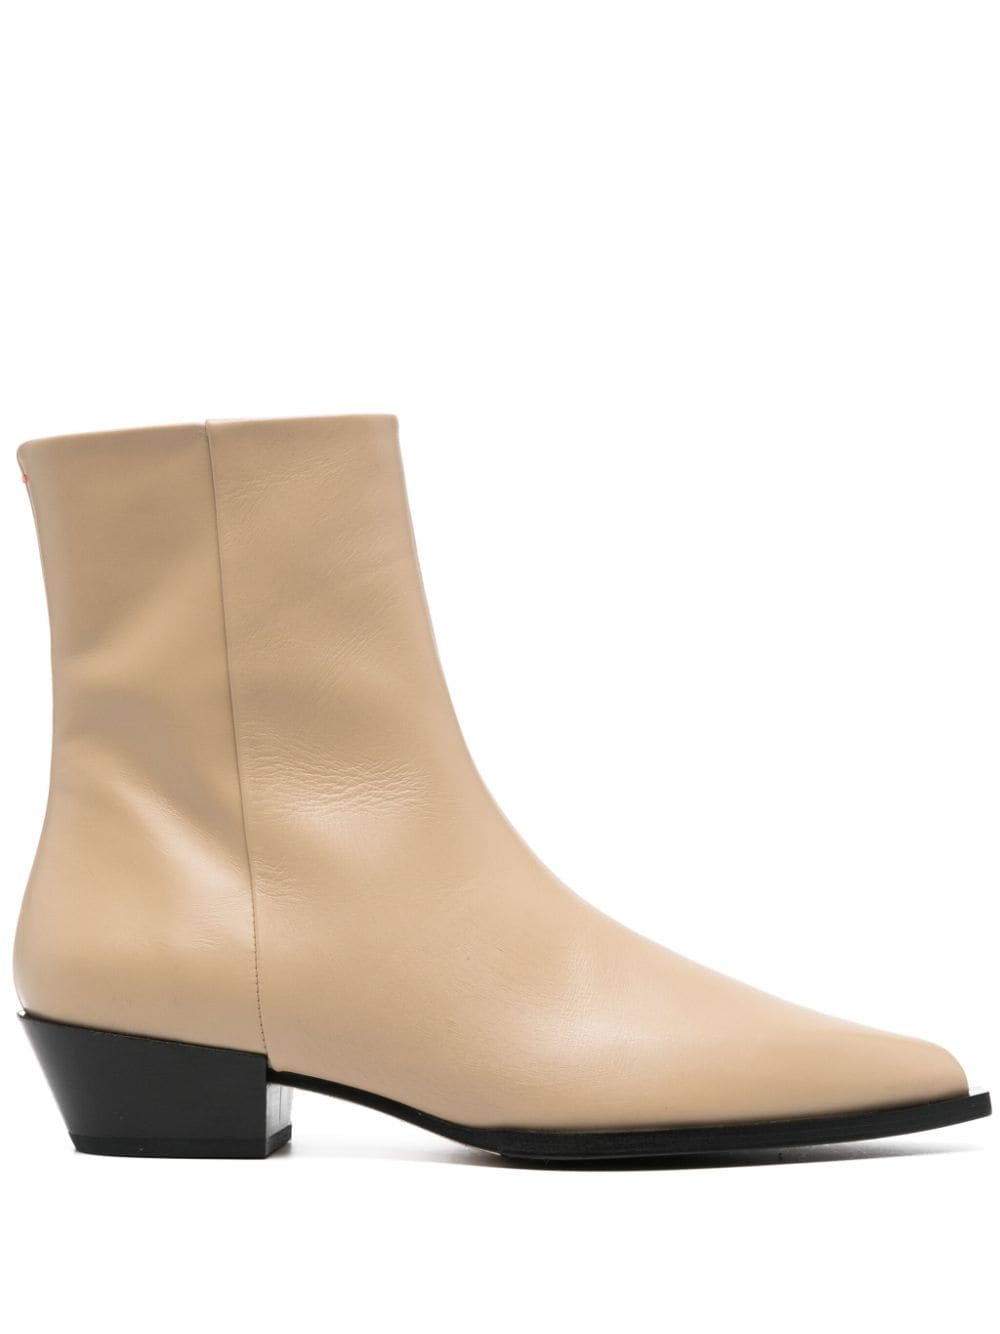 Aeyde Ruby leather ankle boots - Neutrals von Aeyde